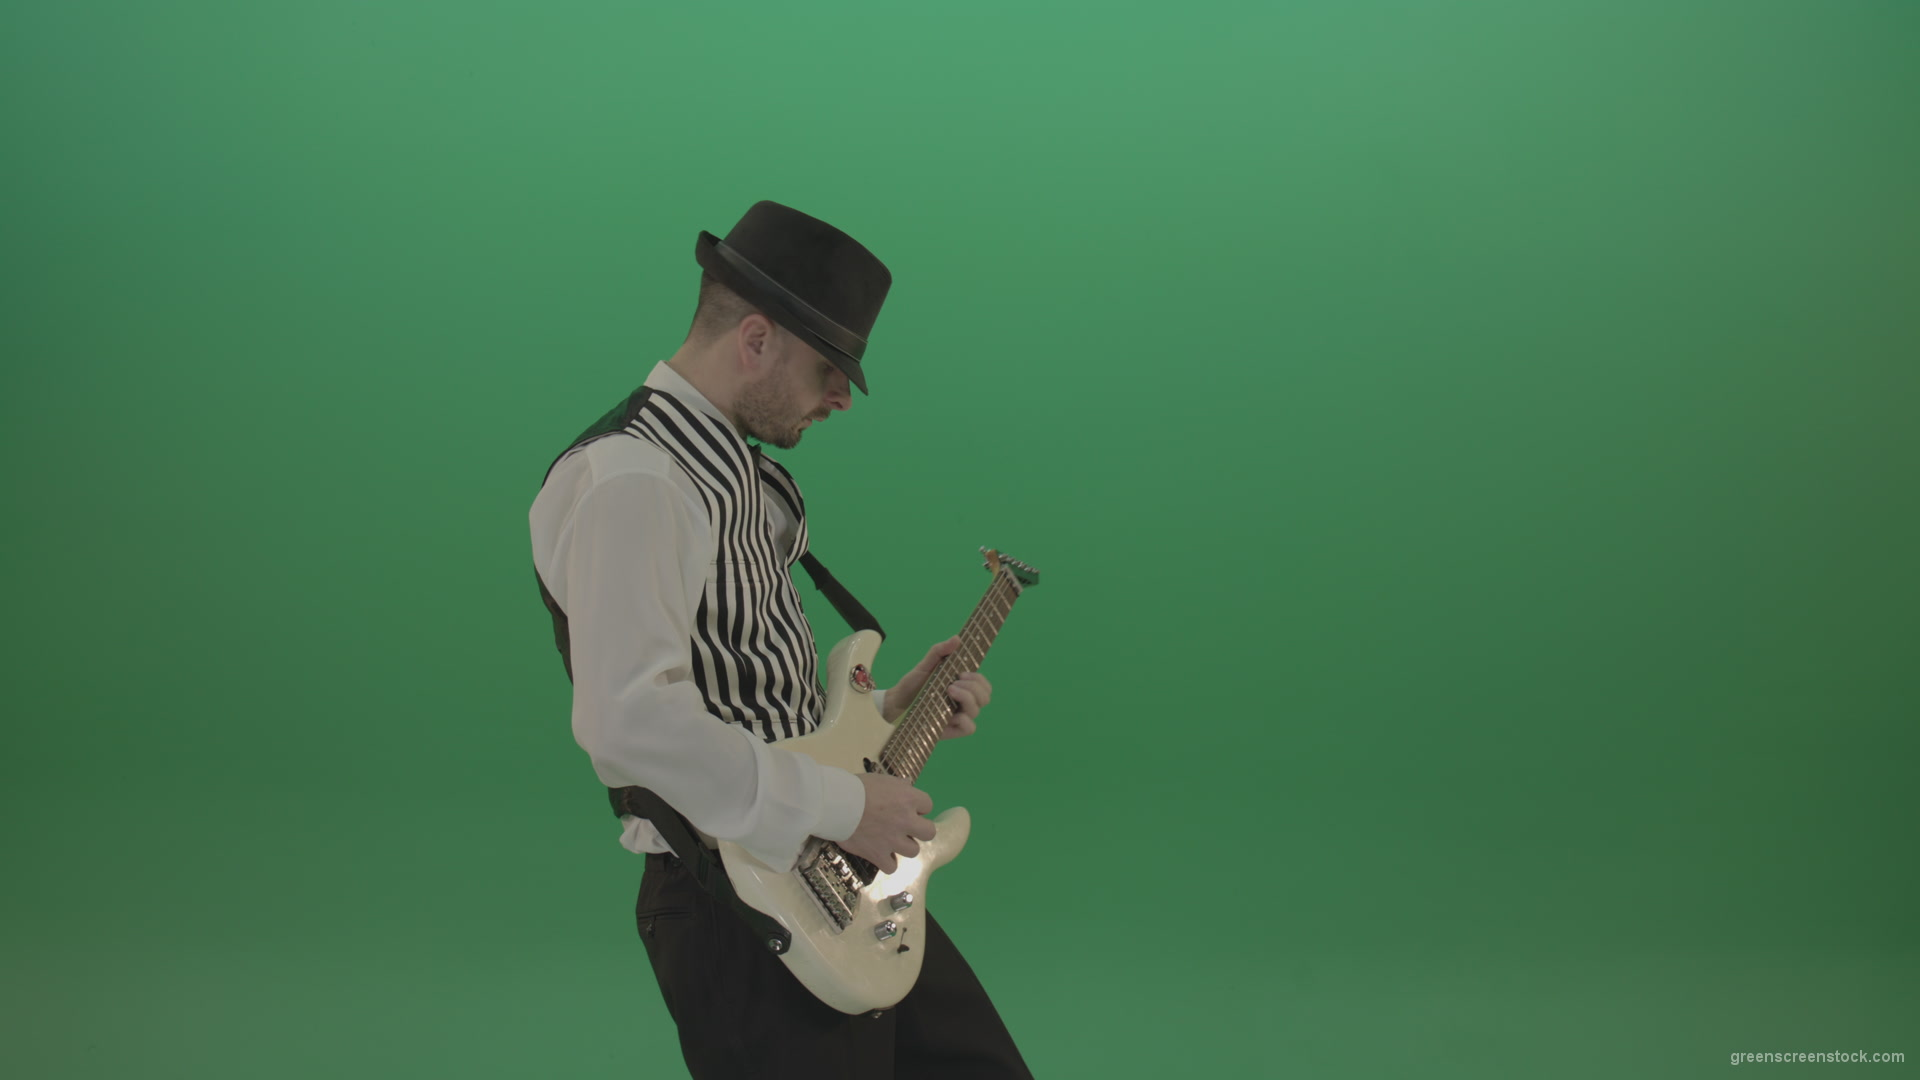 Classic-jazz-guitarist-play-white-electro-guitar-solo-music-on-green-screen_006 Green Screen Stock